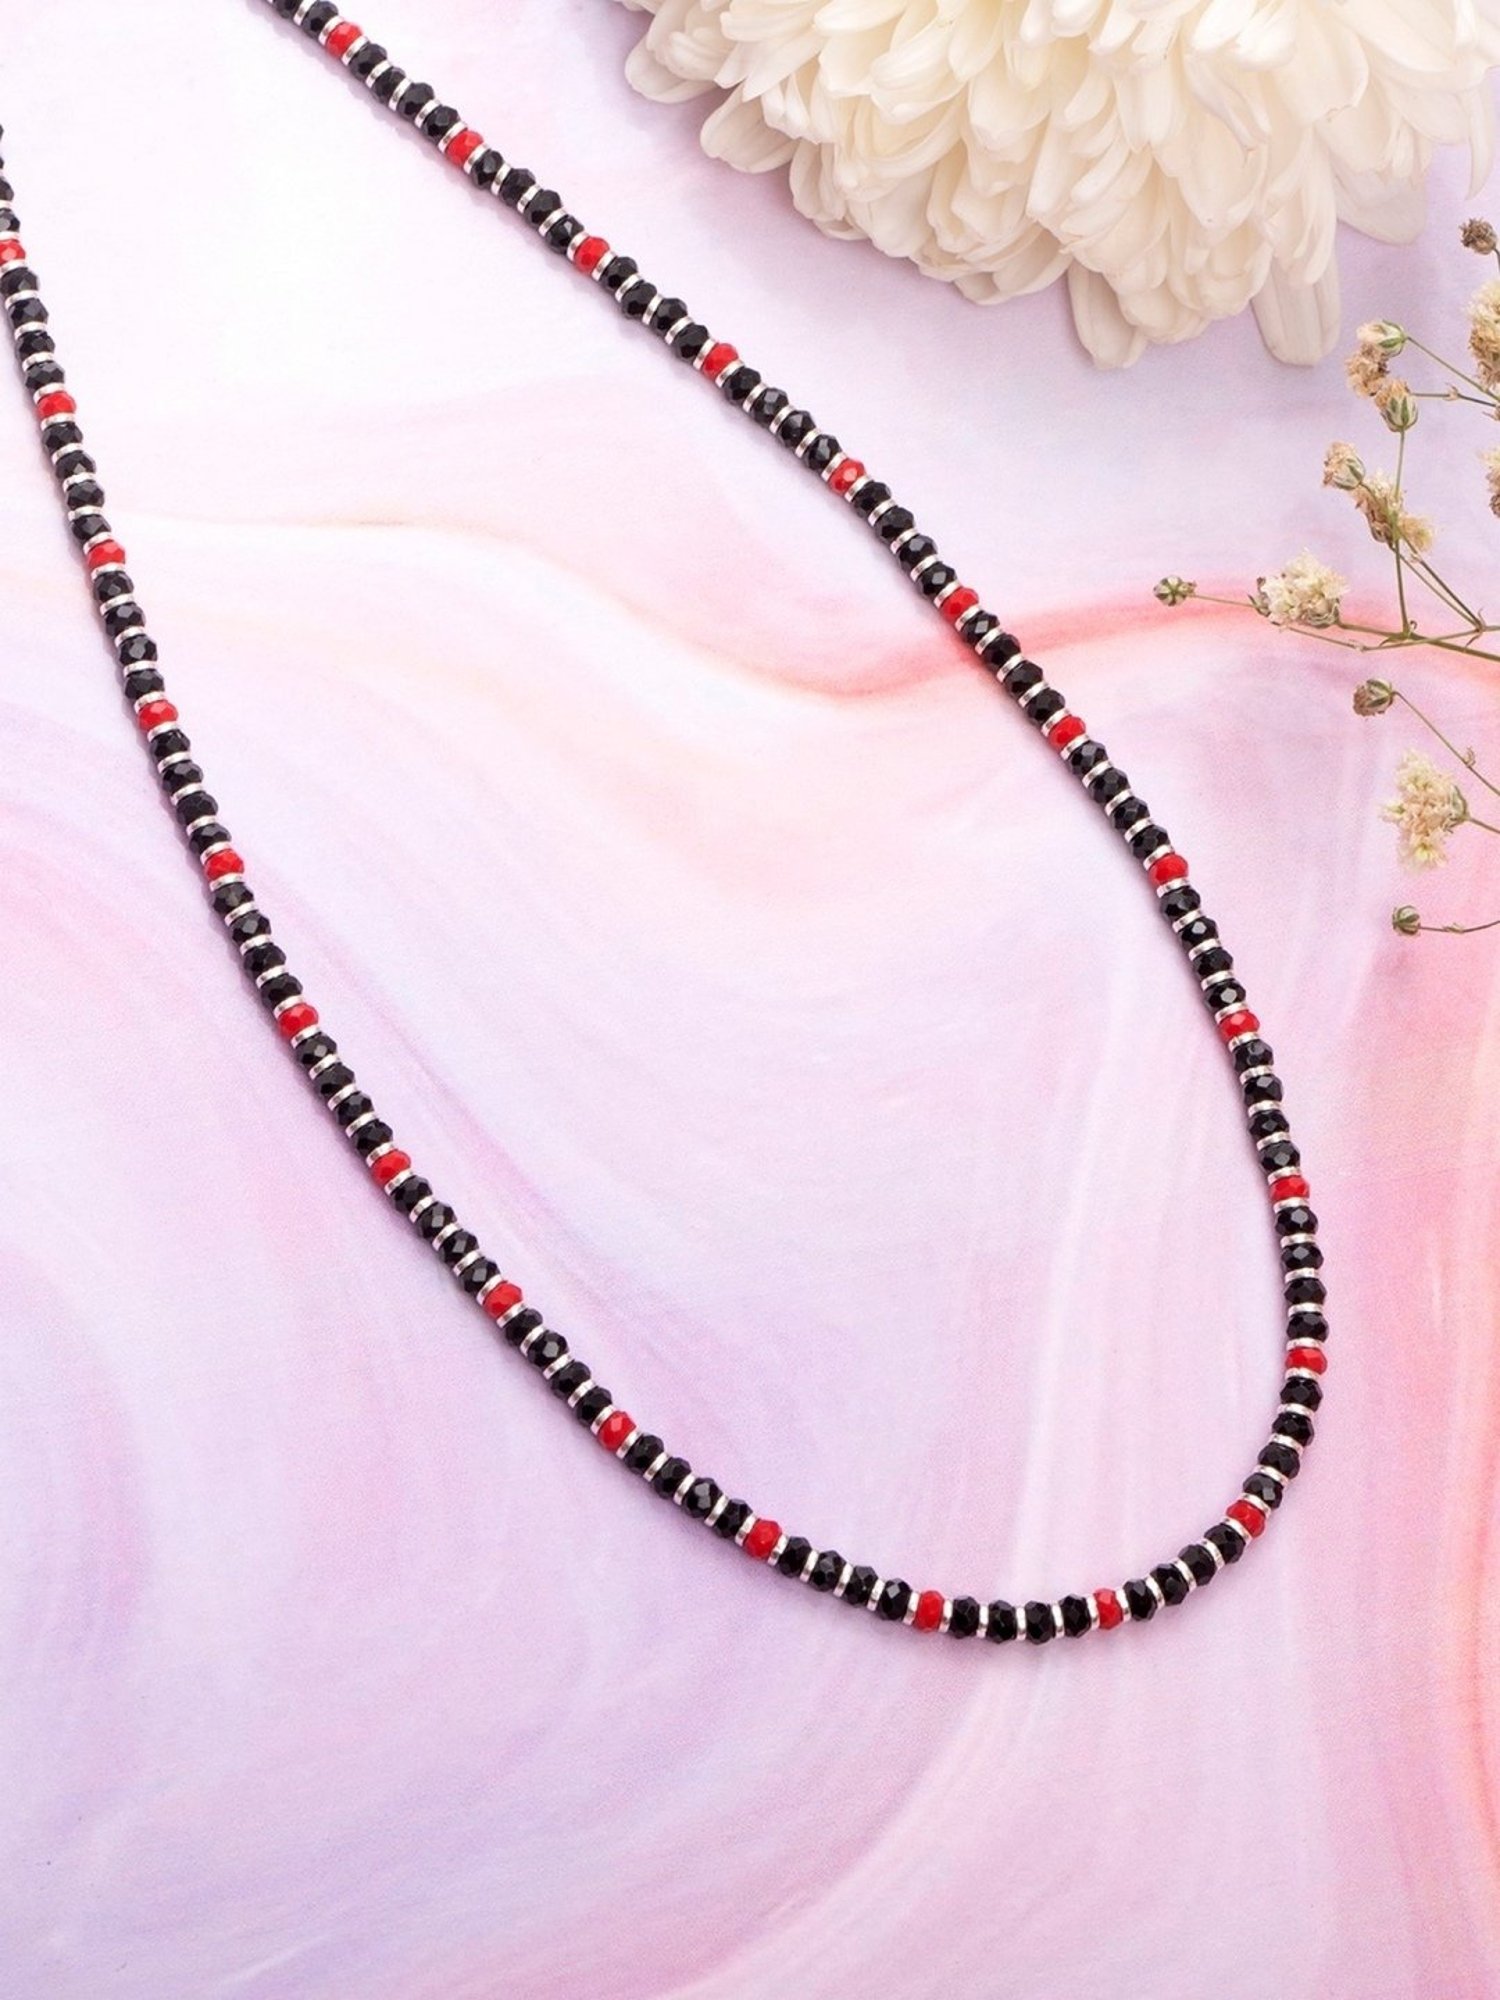 Red and black beads necklace | Black bead necklace, Beaded necklace,  Handmade necklaces